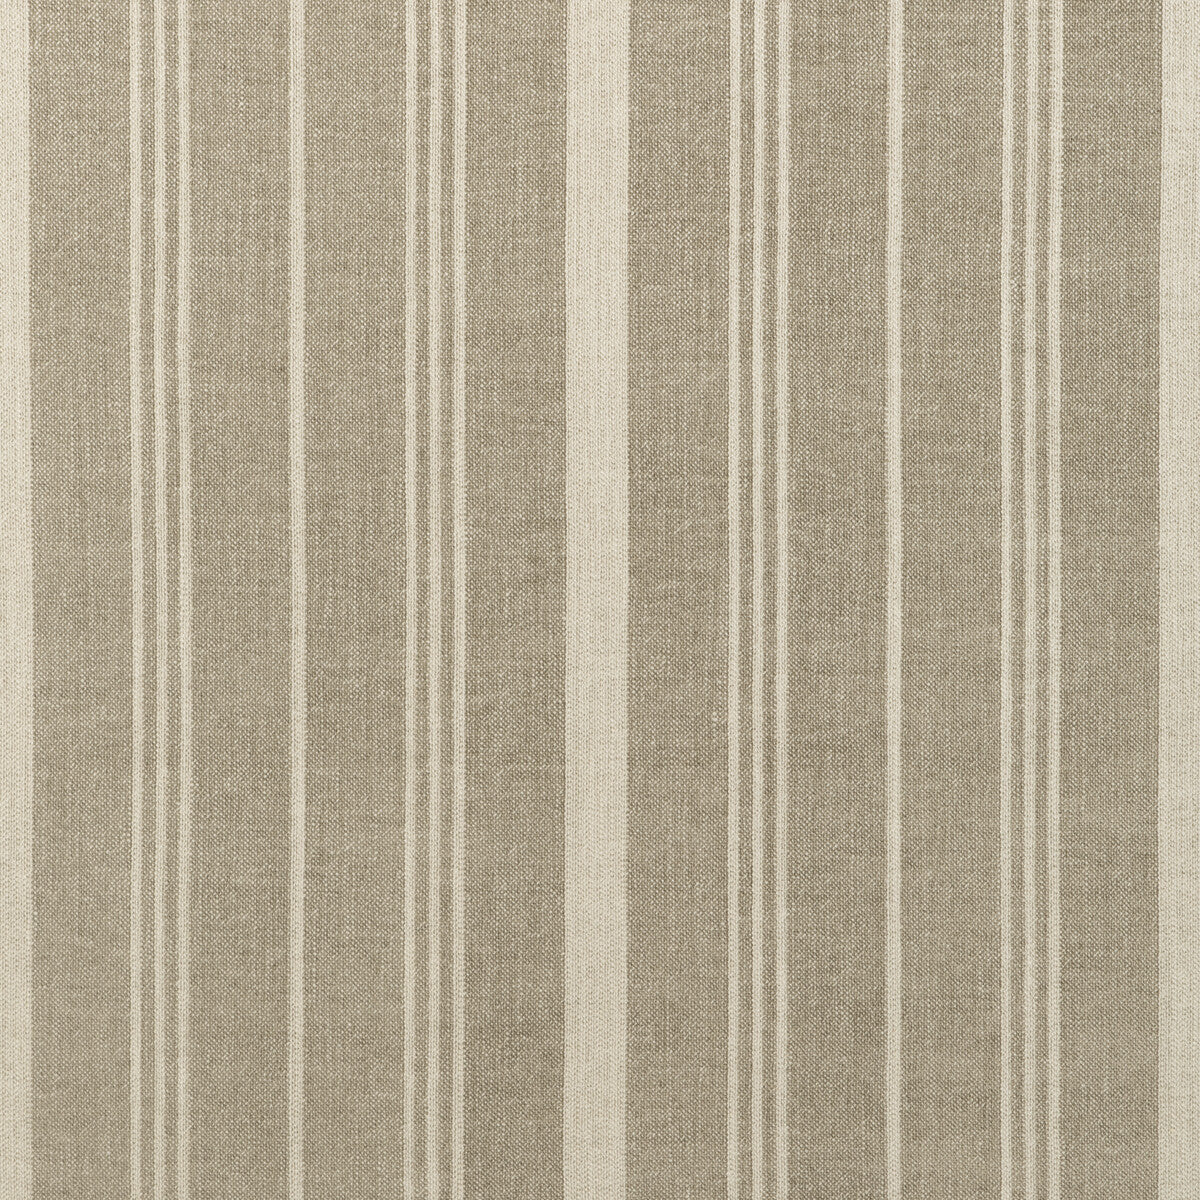 Furrow Stripe fabric in linen color - pattern 36902.106.0 - by Kravet Couture in the Atelier Weaves collection